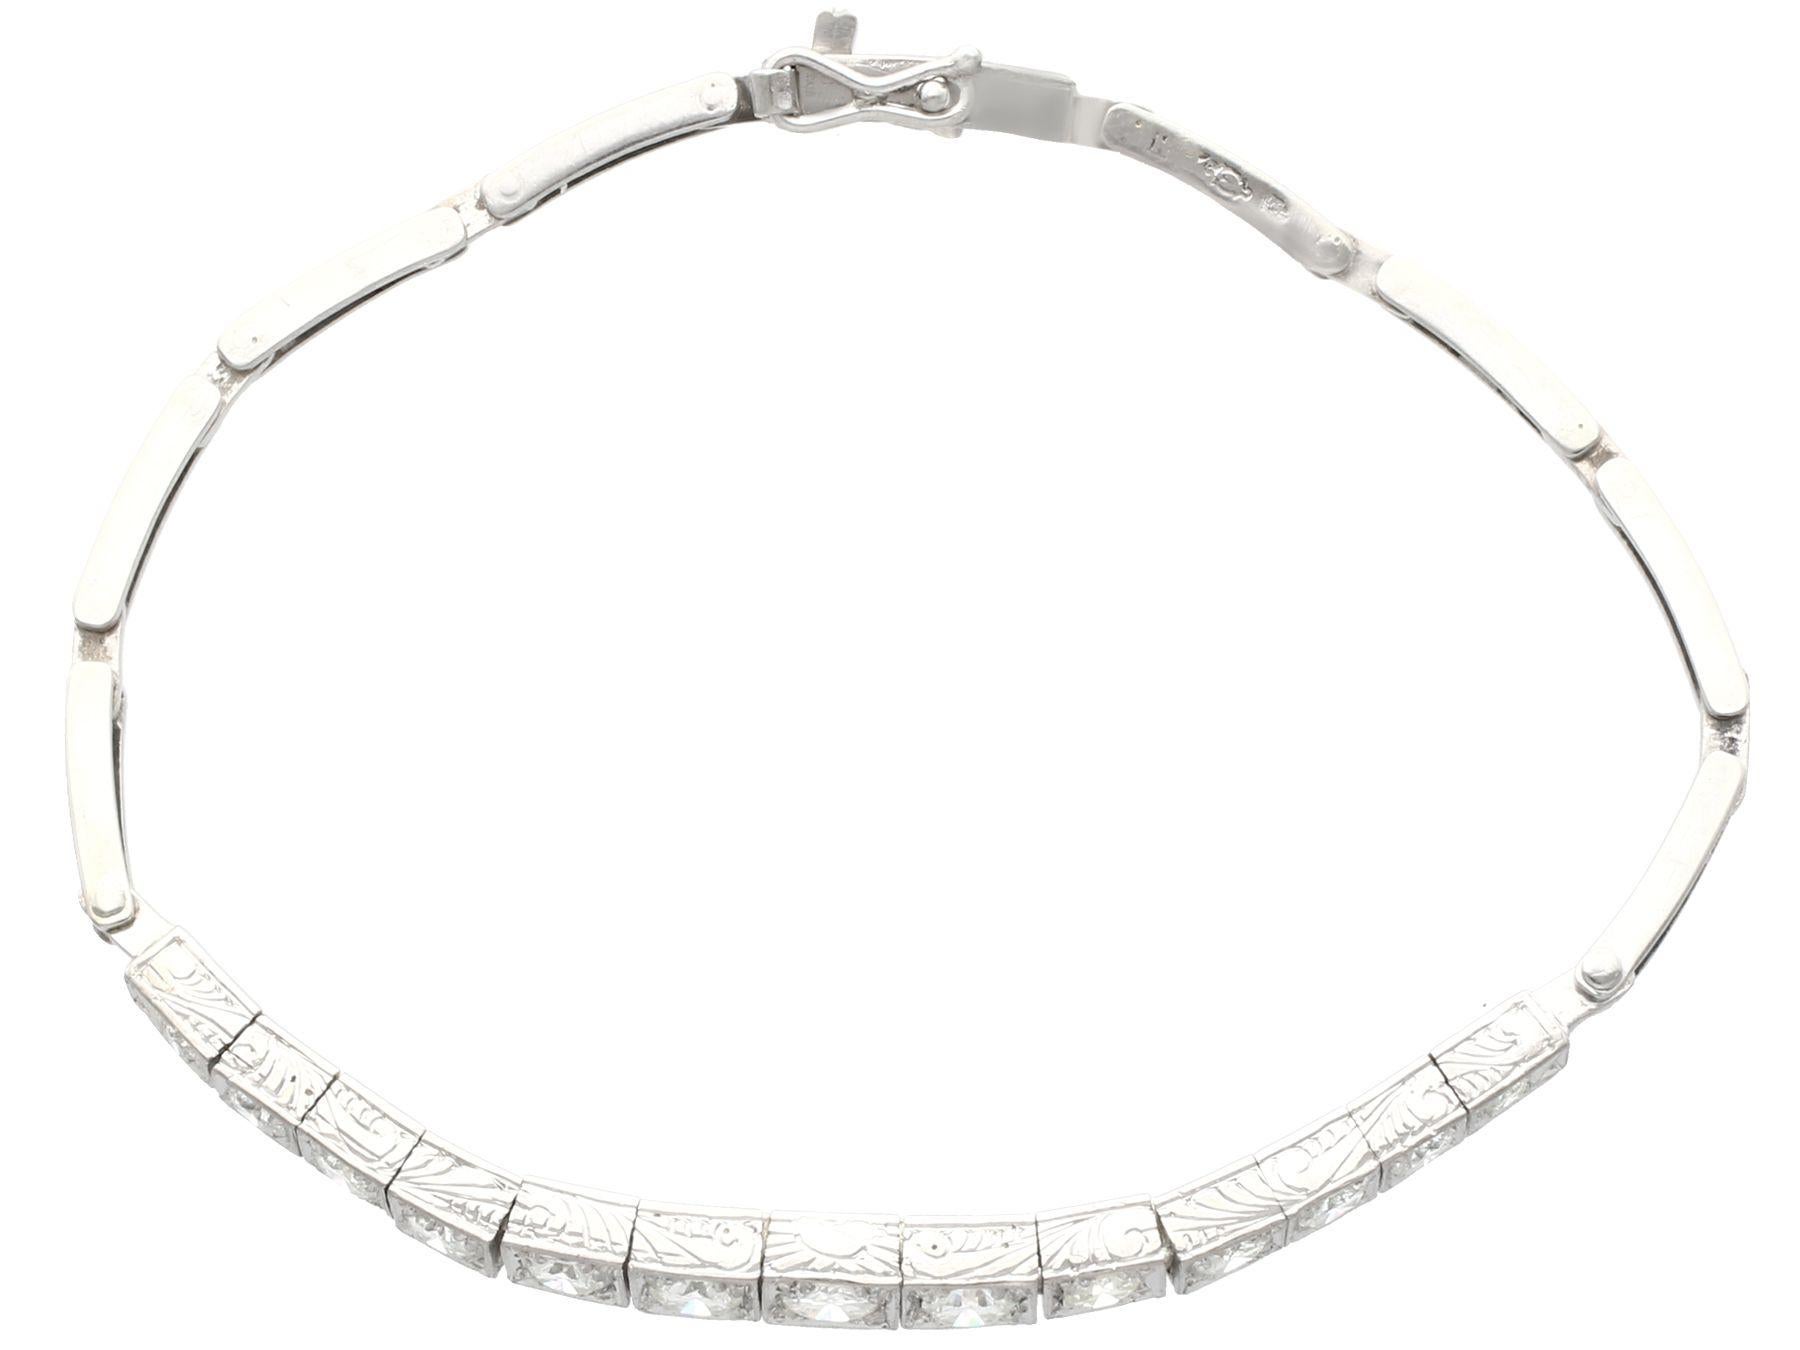 A stunning, fine and impressive antique 1930's 2.02 carat diamond and 18k white gold bracelet; part of our diverse antique jewellery and estate jewelry collections.

This stunning 1930's antique diamond bracelet has been crafted in 18k white